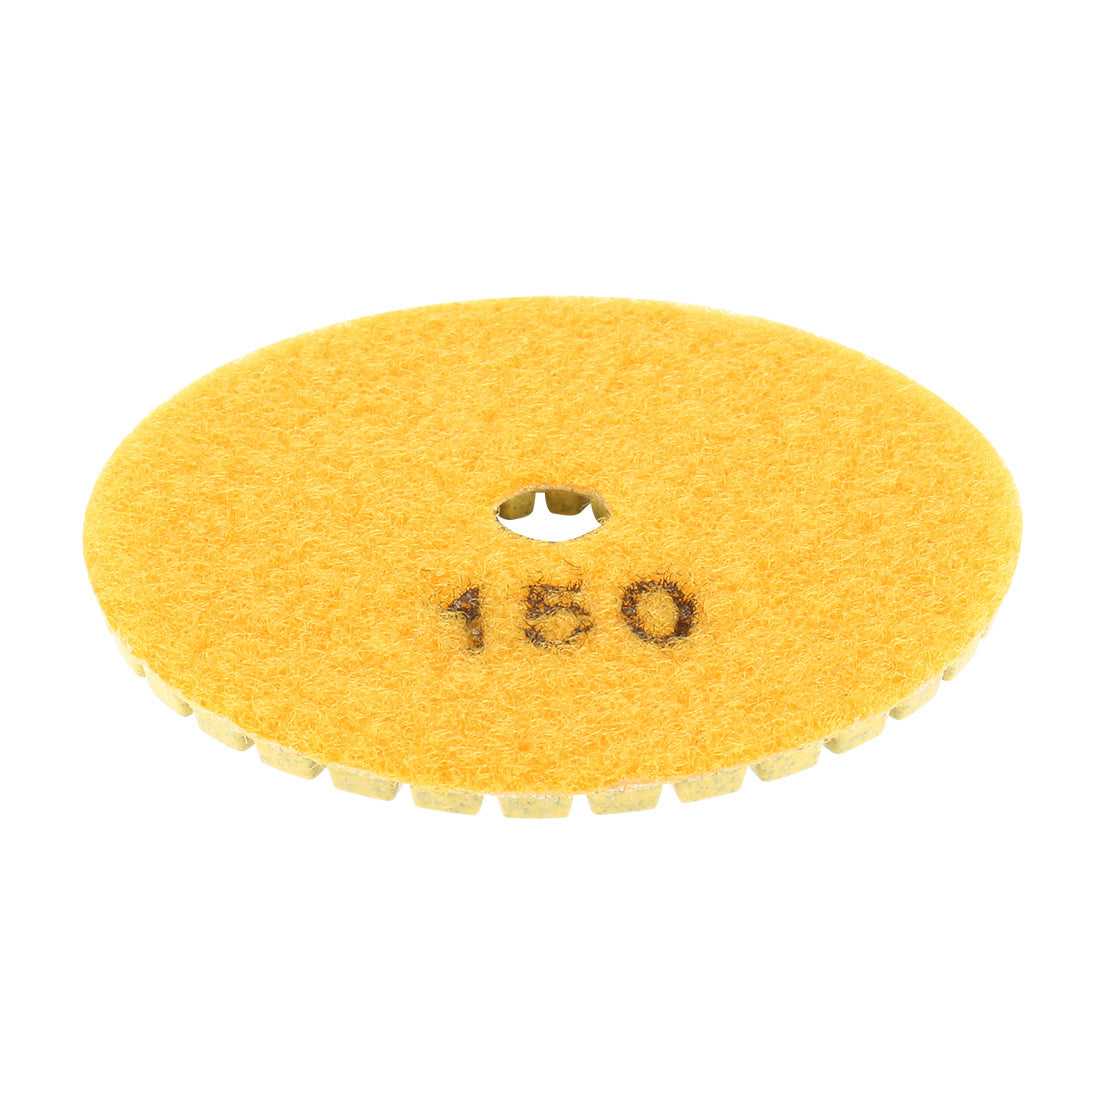 uxcell Uxcell 4-inch Diamond Wet Polishing Sanding Grinding Pads 10 in 1 w Rubber Backer Pad